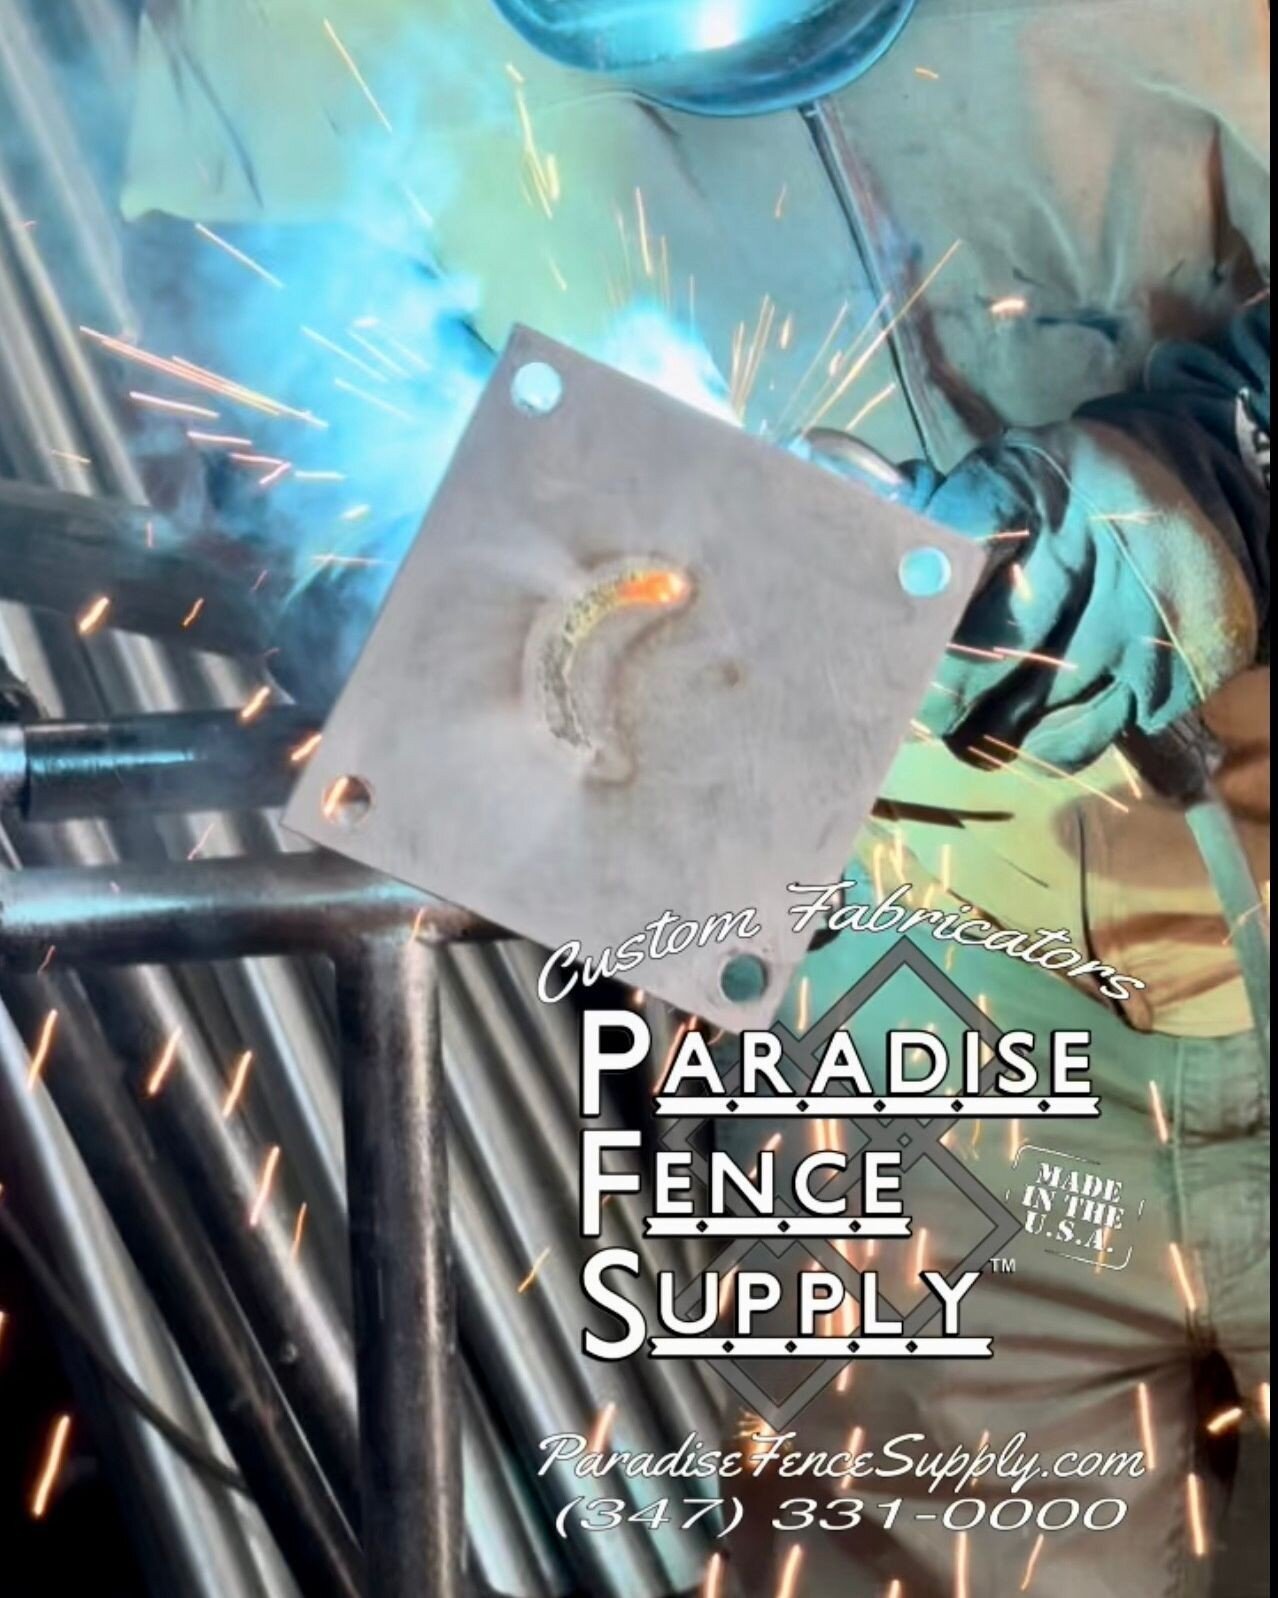 Looking for top-notch custom fence fabrication services? Our team at Paradise Fence Supply offers expert welding and fabrication services. Call (347) 331-0000 or visit ParadiseFenceSupply.com for more information.⁠
⁠
#CustomFabrication #Welding #Gate